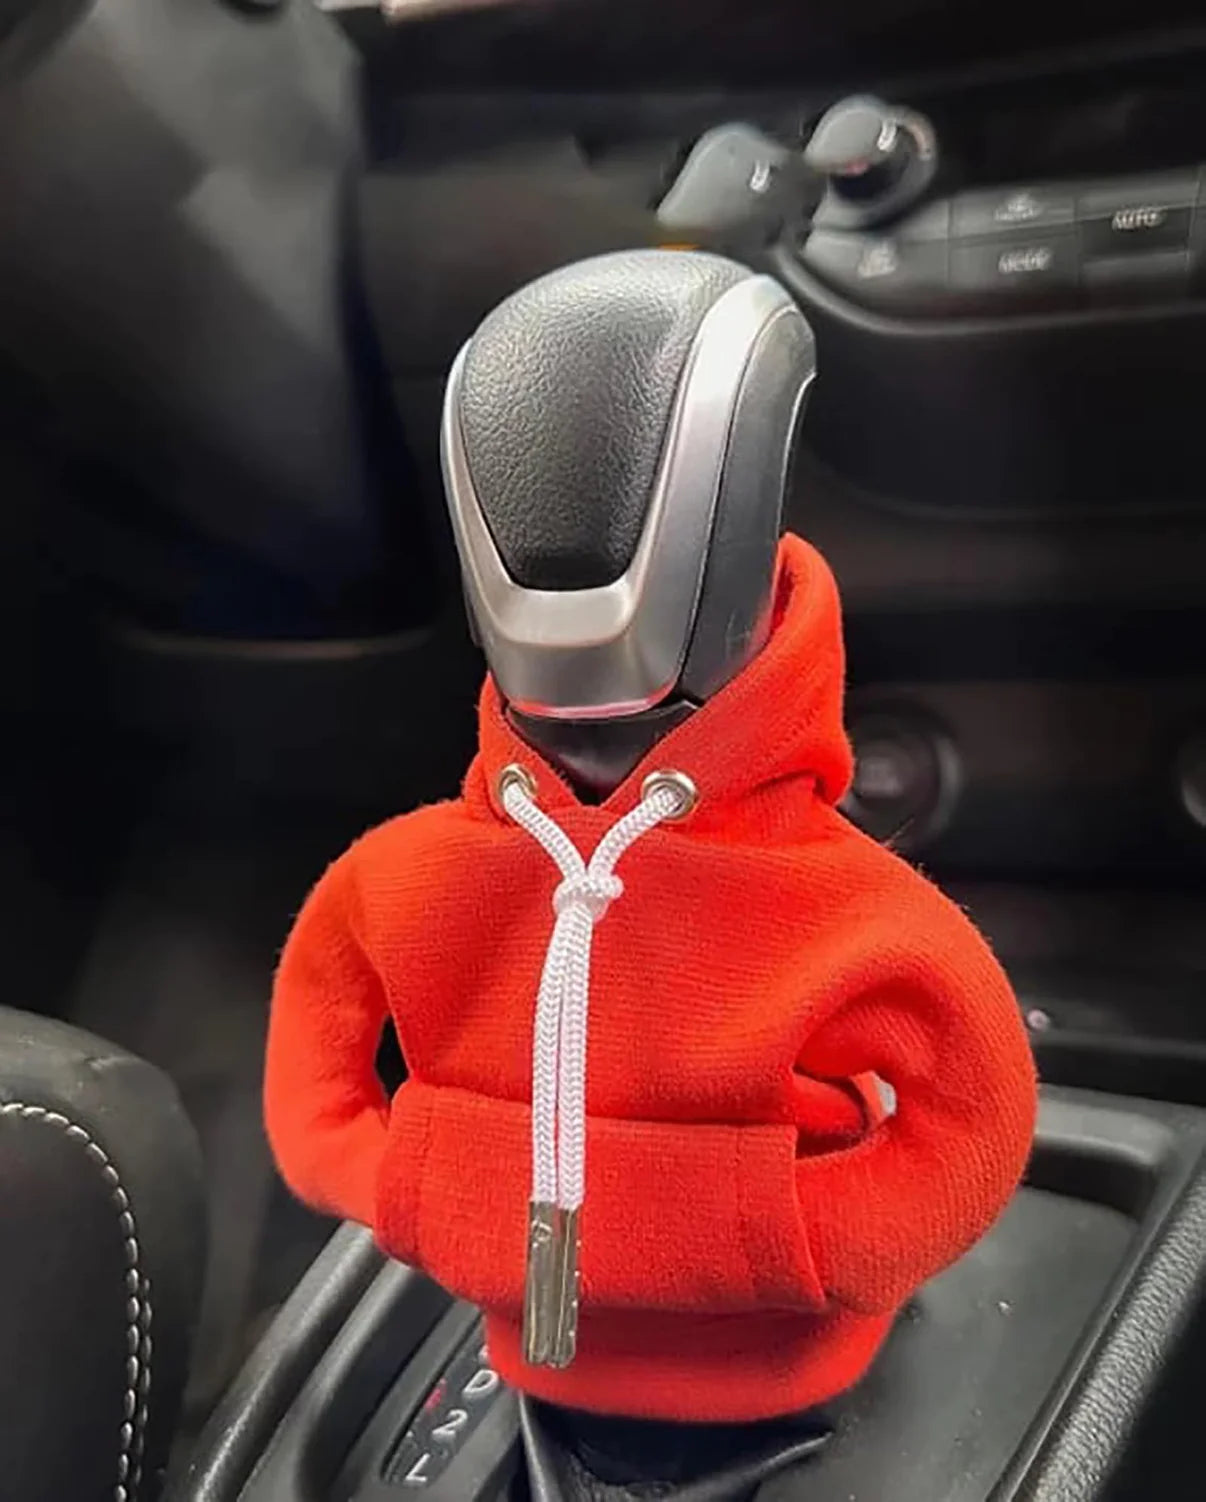 GearCozy™ Hoodie For Car Gear Shift Cover (Buy 1 Get 1 Free)